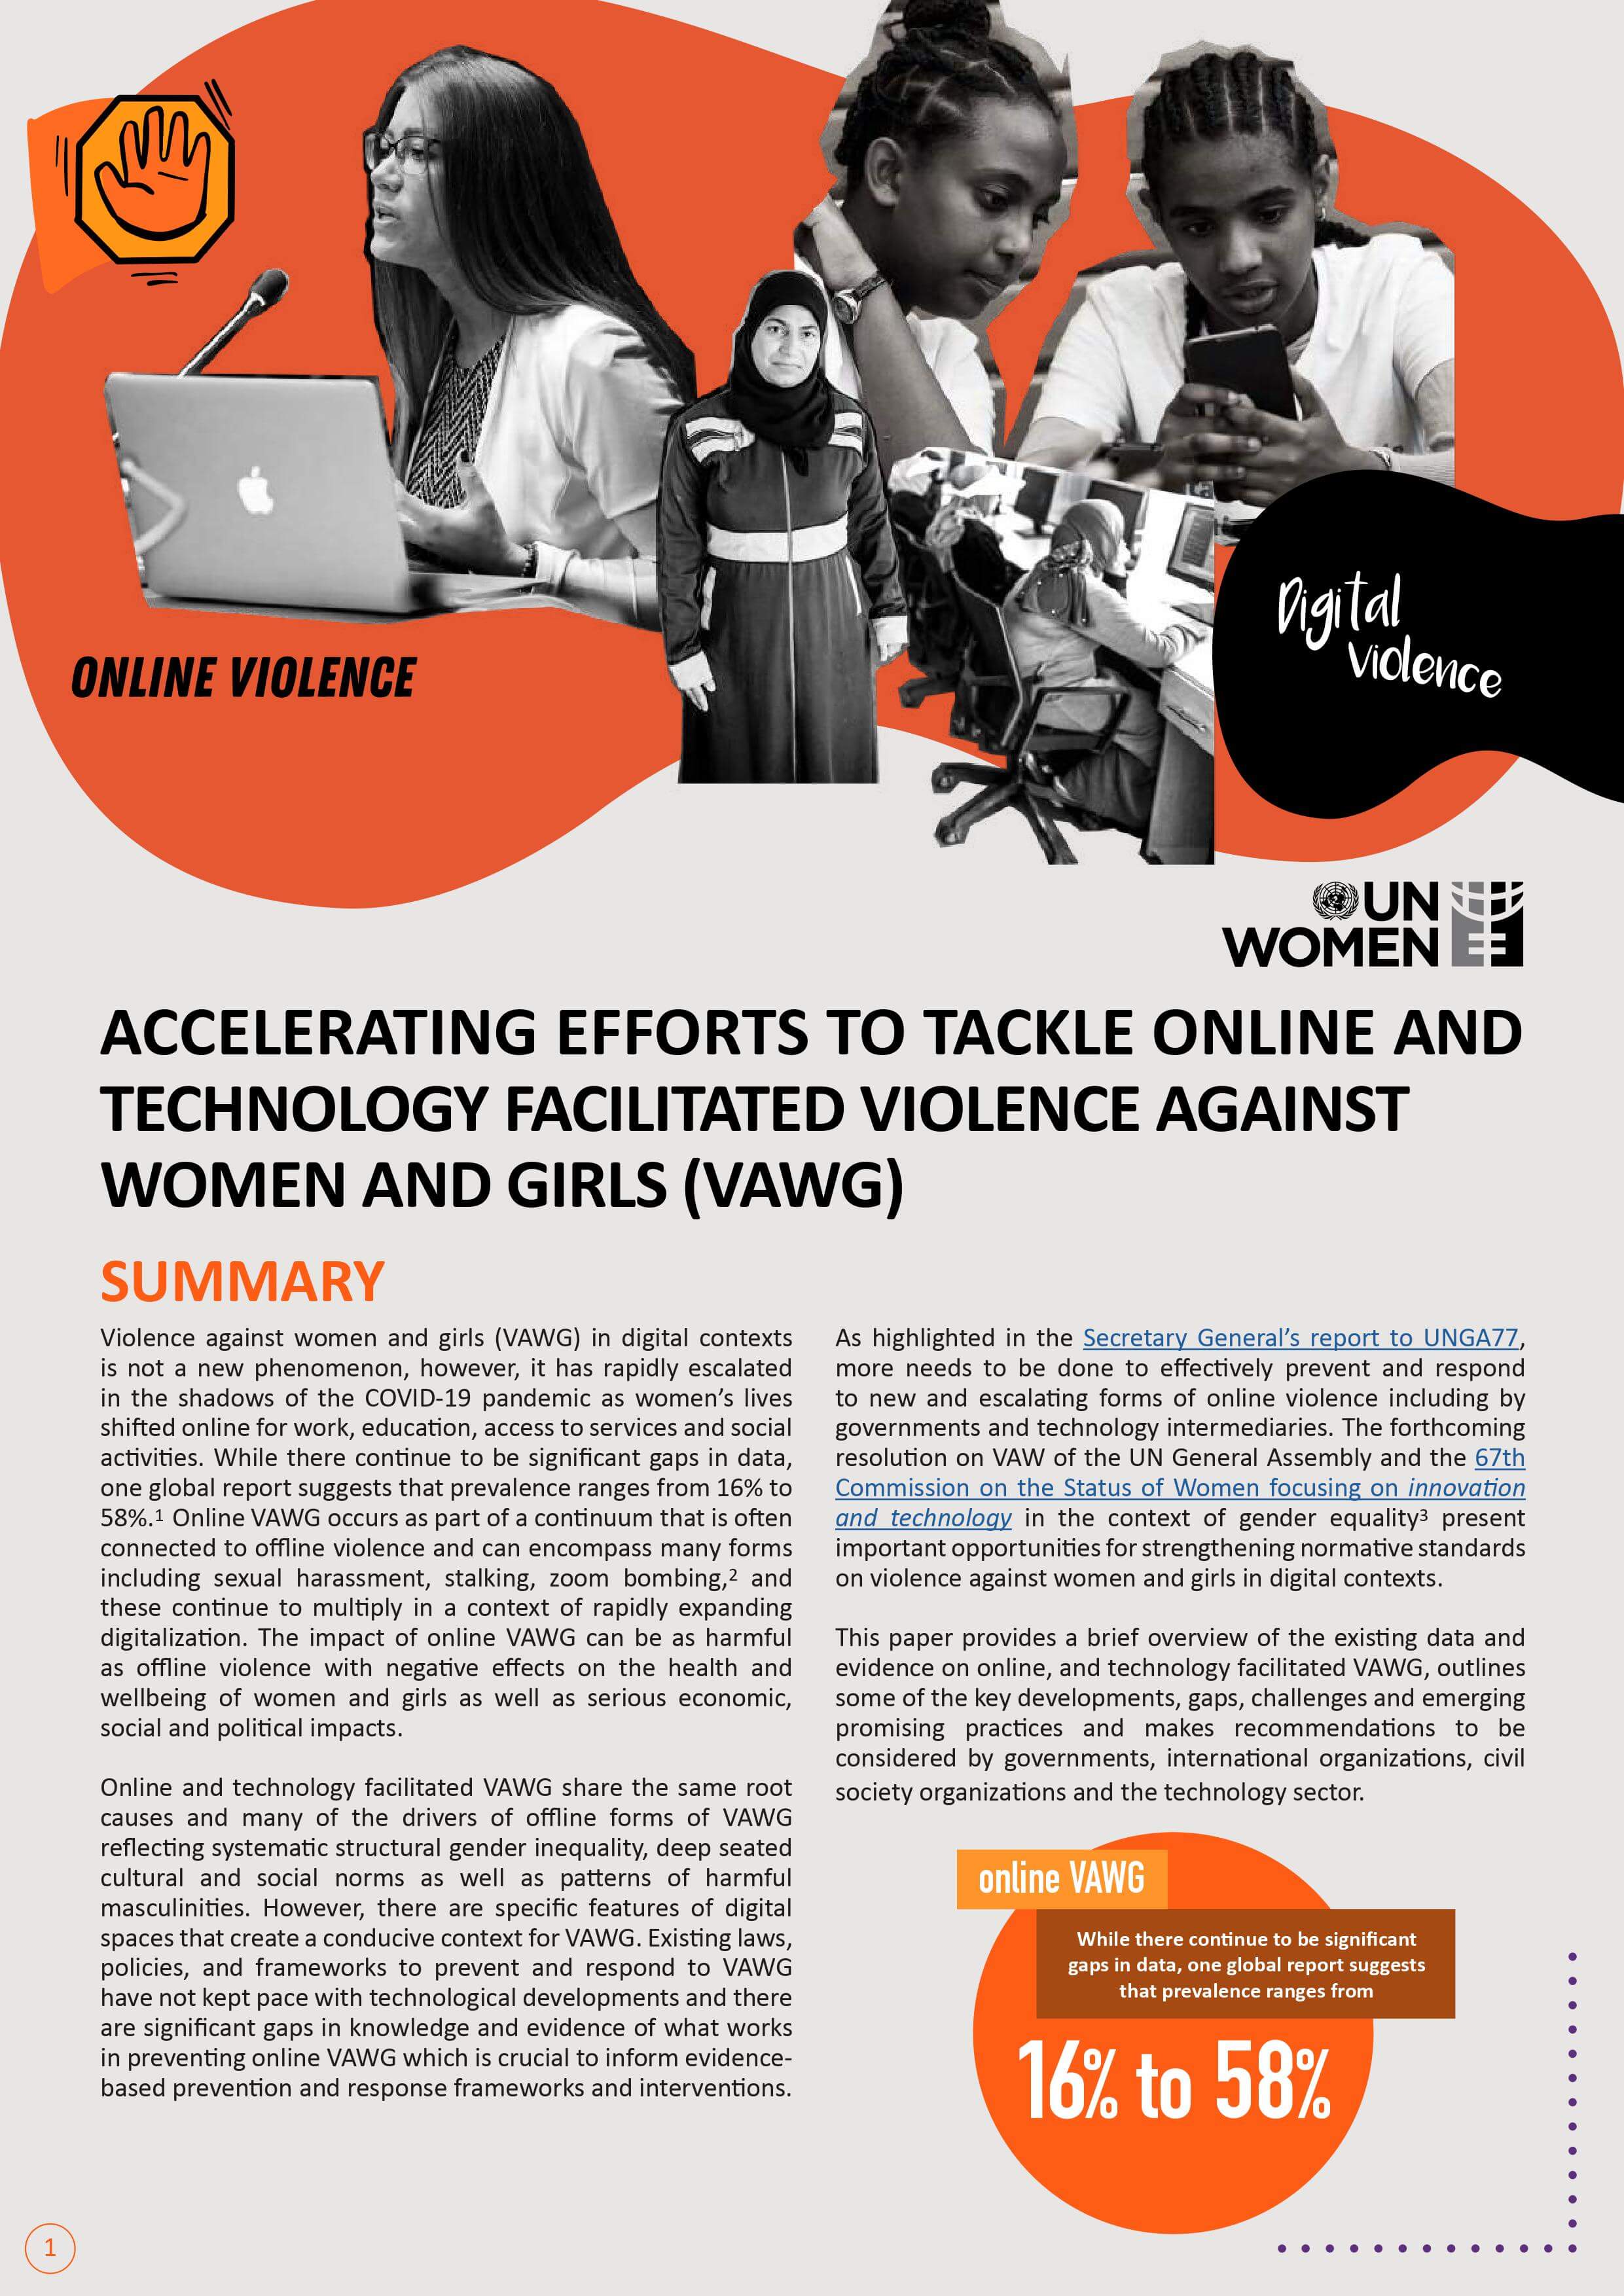 Accelerating efforts to tackle online and technology facilitated violence against women and girls